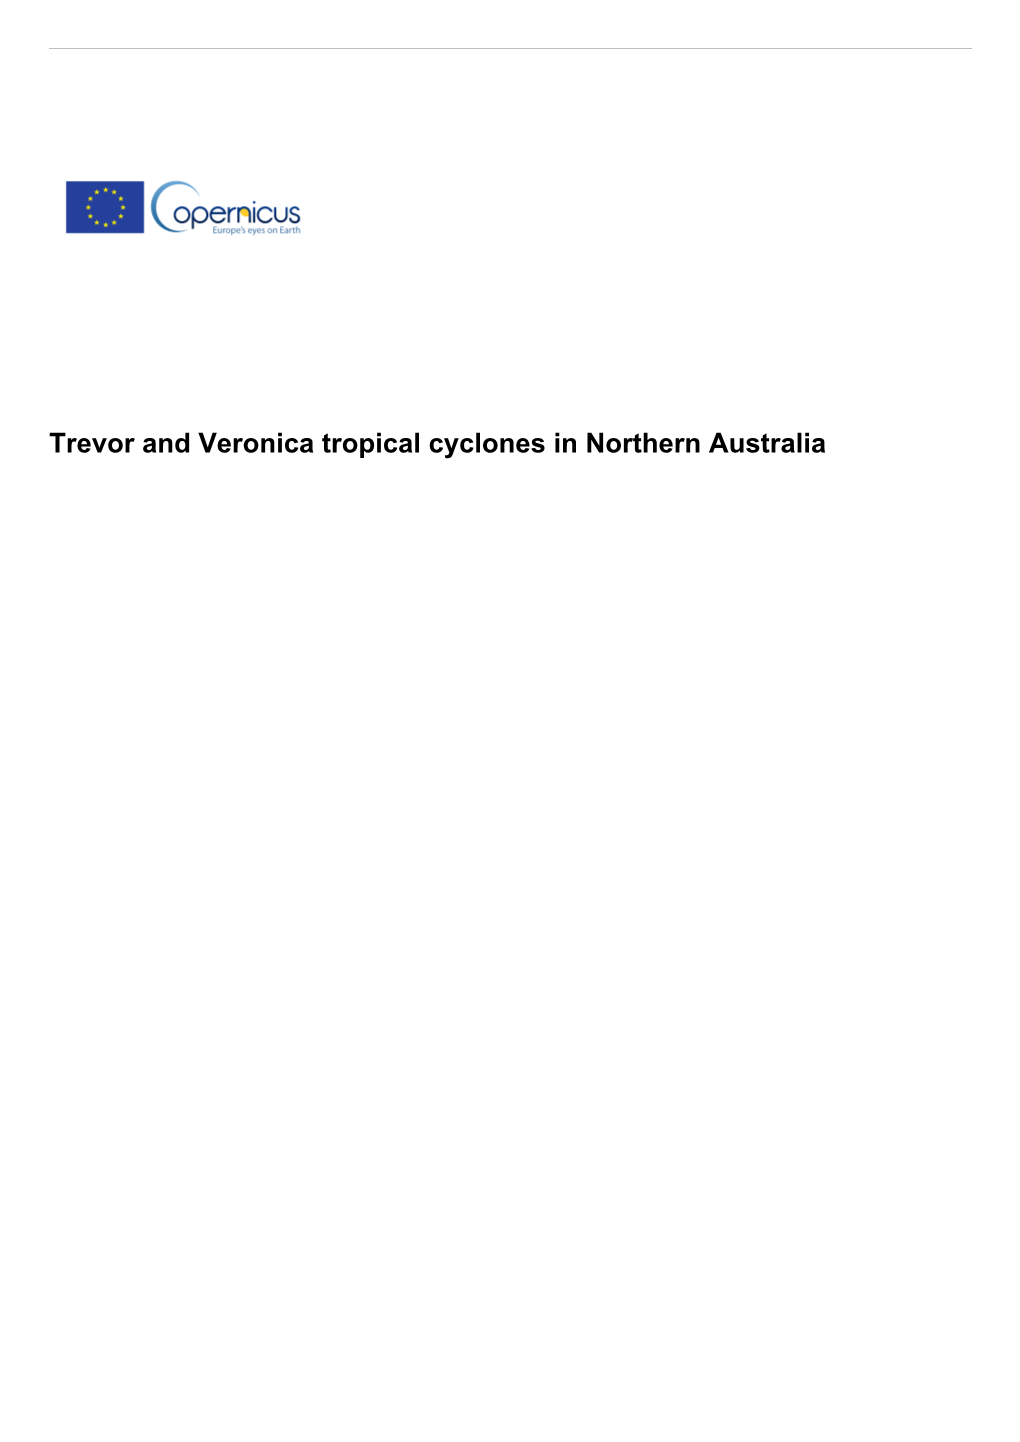 Trevor and Veronica Tropical Cyclones in Northern Australia